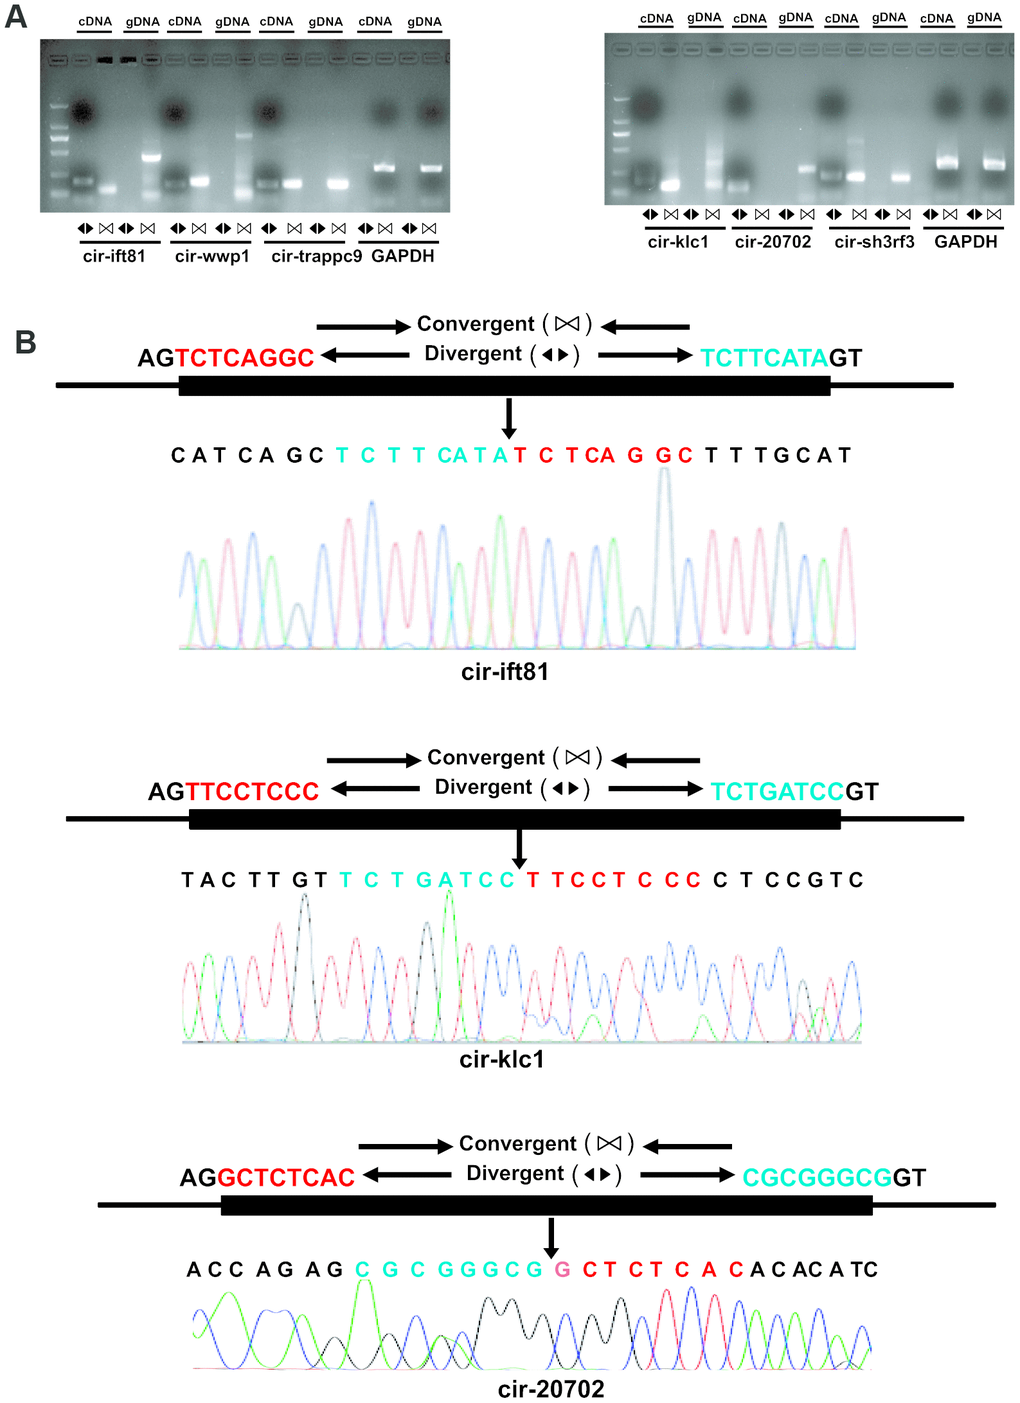 Validation of altered circRNA expression. (A) RNA was extracted from the ventricles of mice treated with or without isoproterenol (Iso) and the circular RNAs were validated by Real-time PCR and Sanger sequencing. The divergent primers were used to amplify circRNAs but the convergent primers were designed to detect the linear form both in cDNA and genomic DNA (gDNA), GAPDH is as a linear control. (B) The amplified circRNAs were confirmed to be head-to-tail spliced via sequencing.